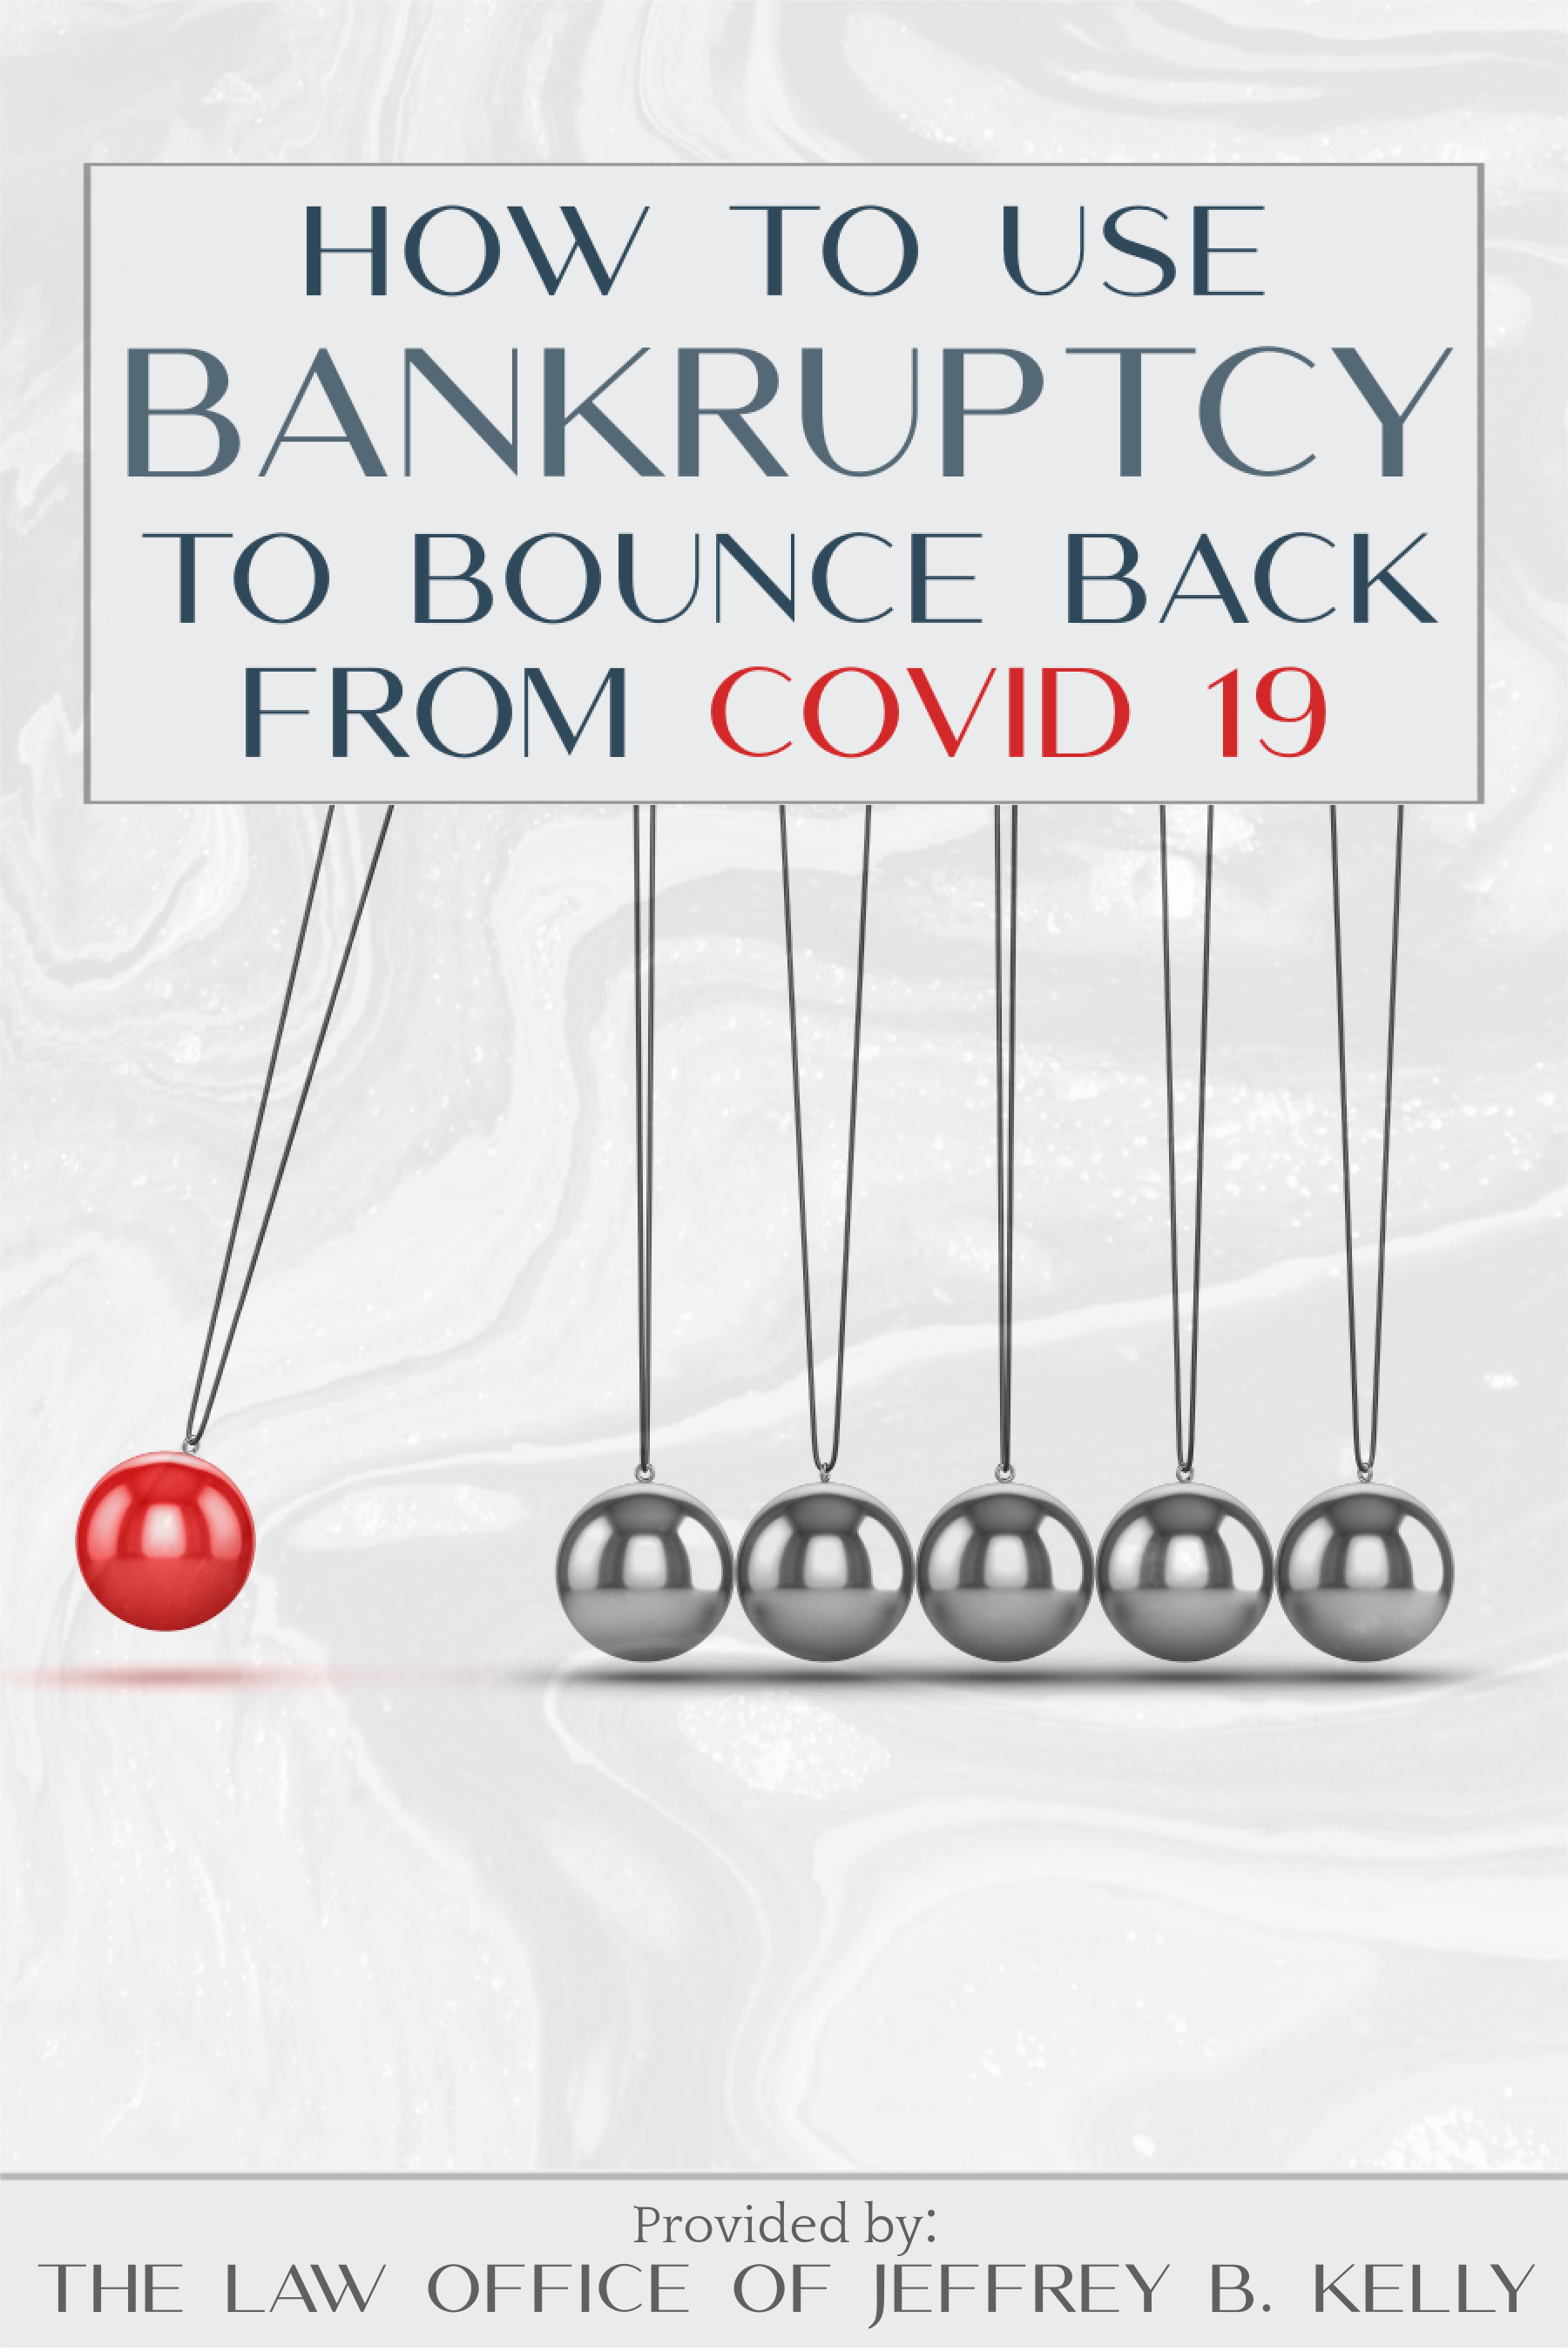 Bankruptcy and Bouncing back from Covid-19